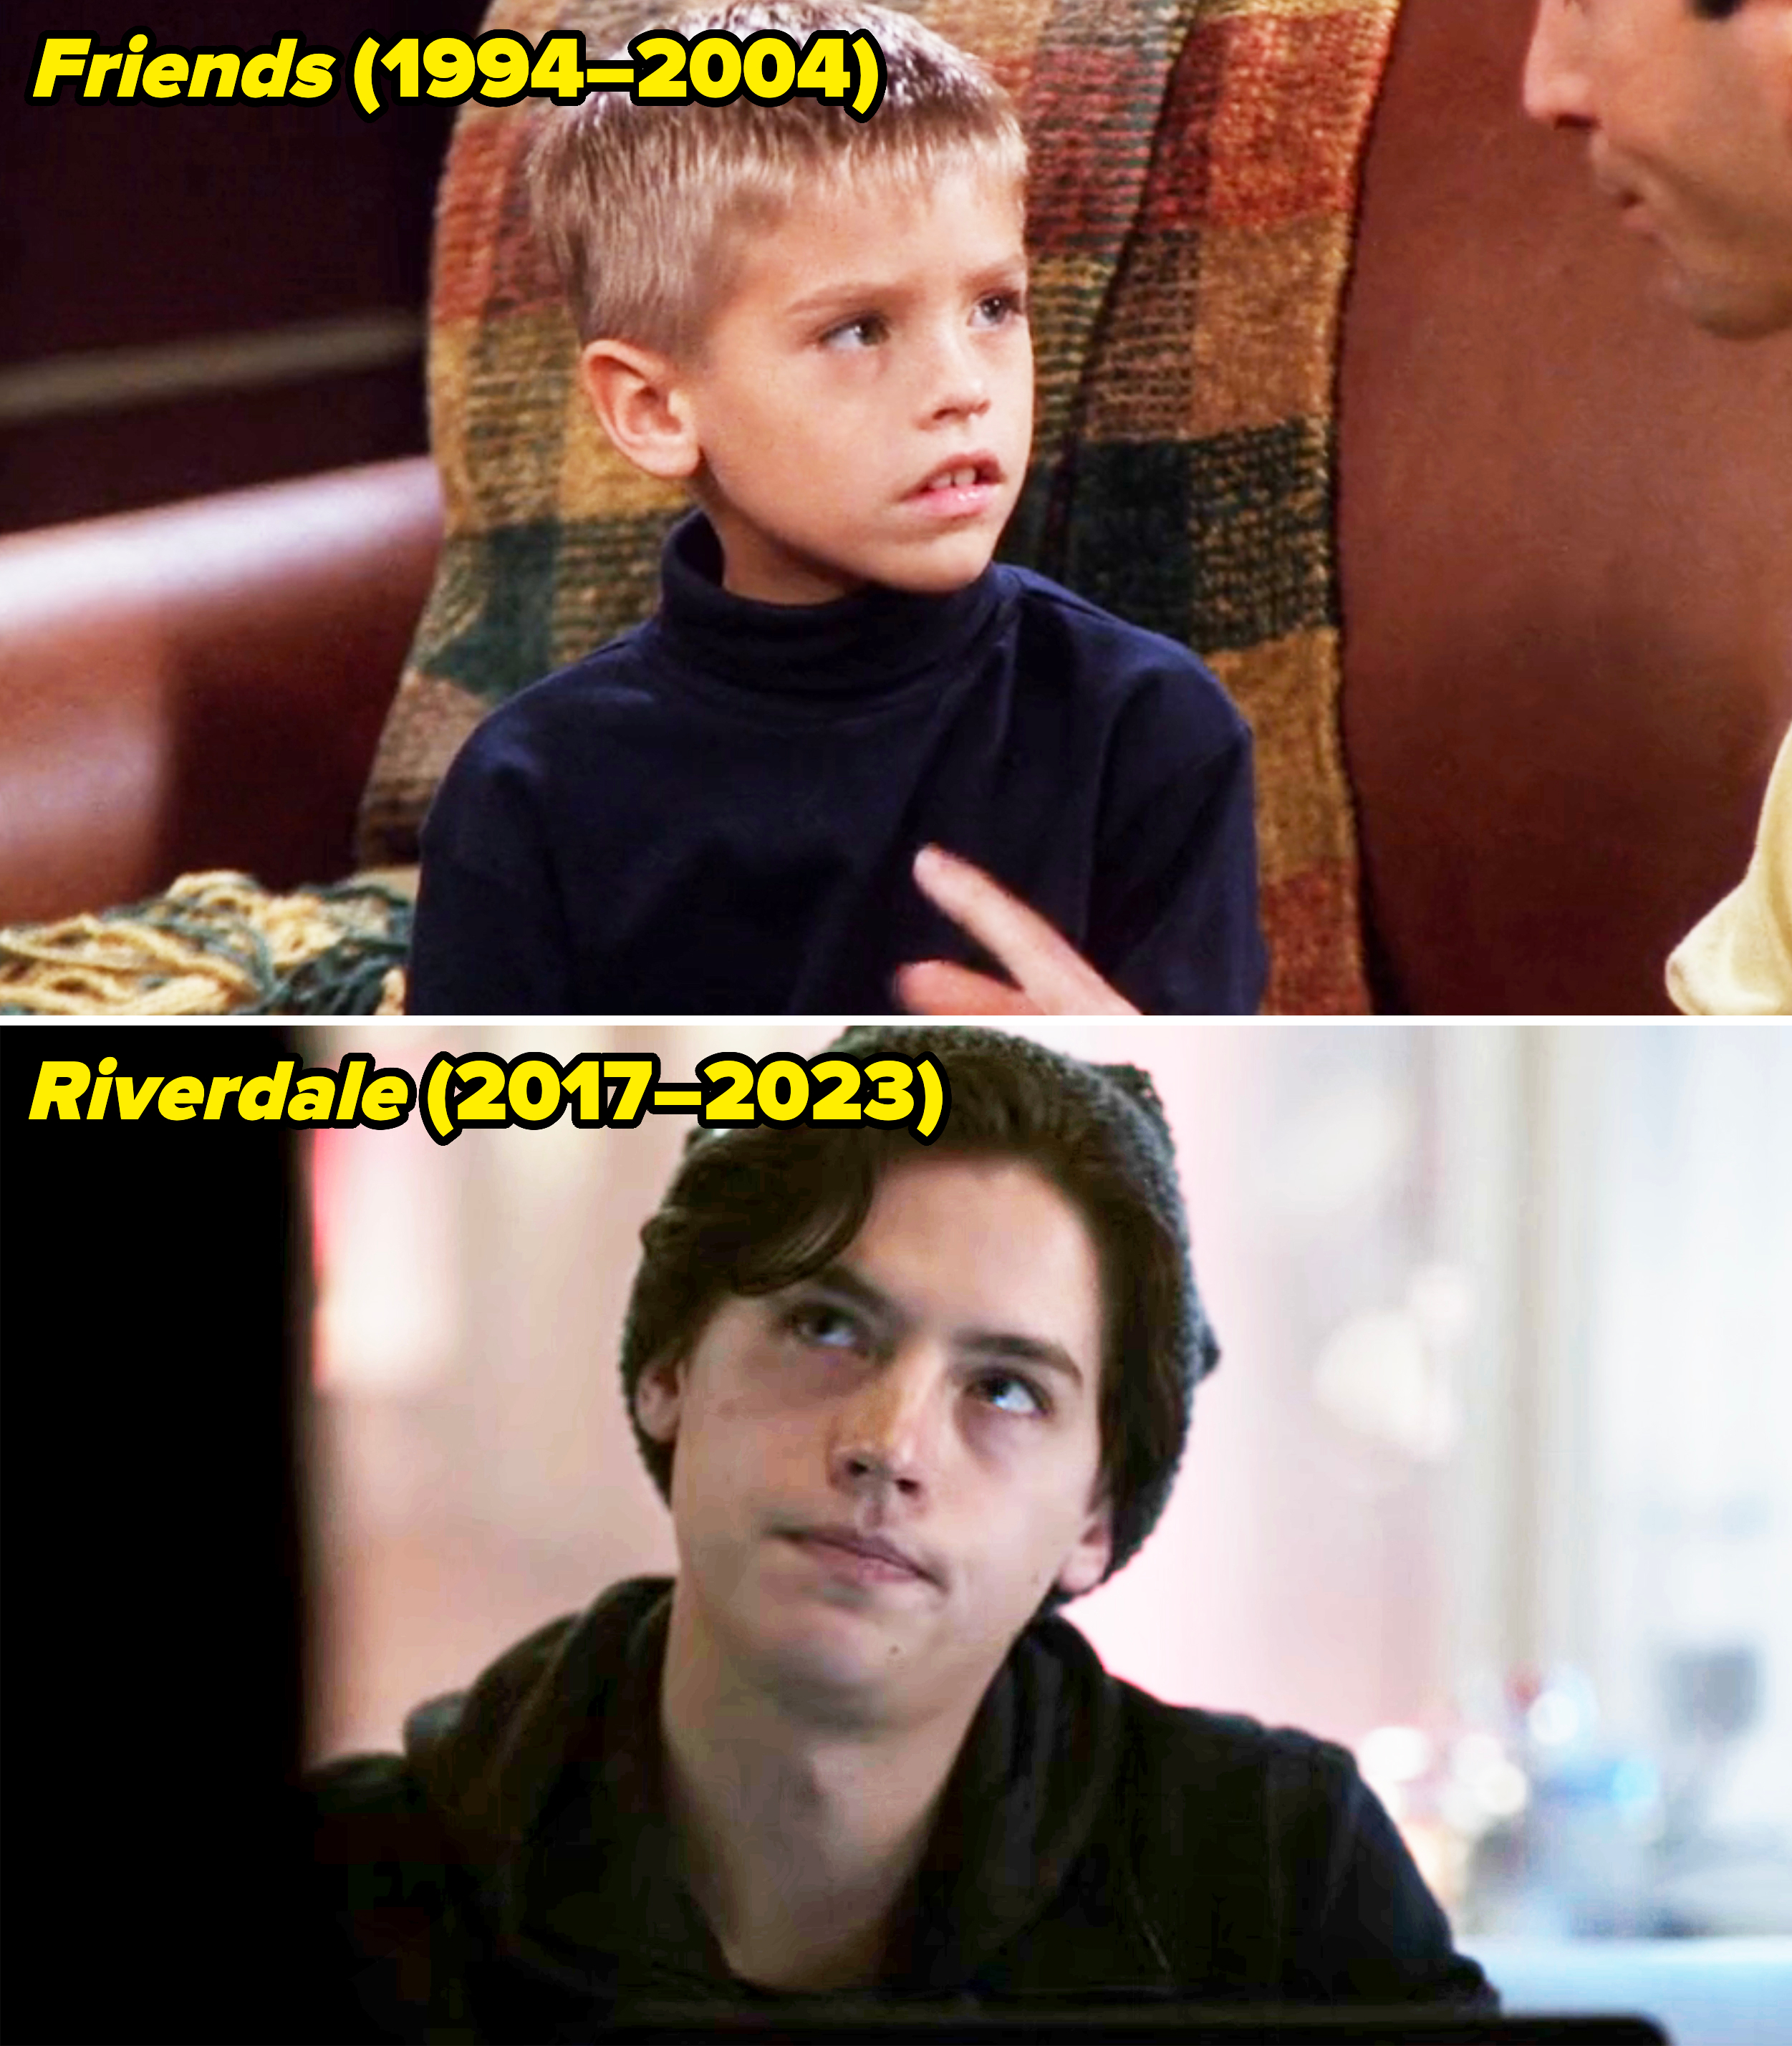 him as a kid on friends and then later in riverdale